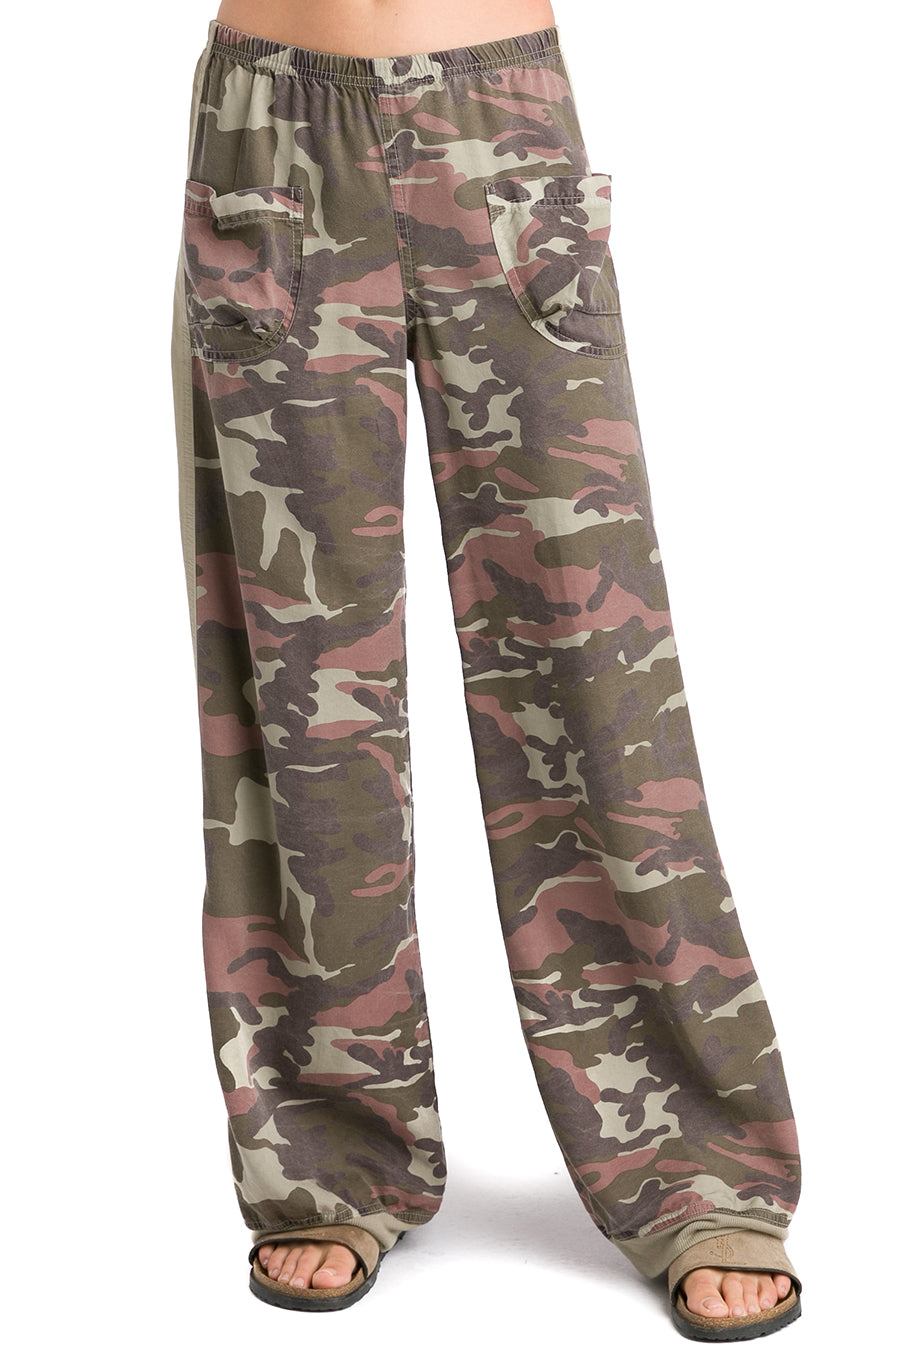 Hard Tail Forever Camo Pocket Front Fatigue Pants - Sand - XL